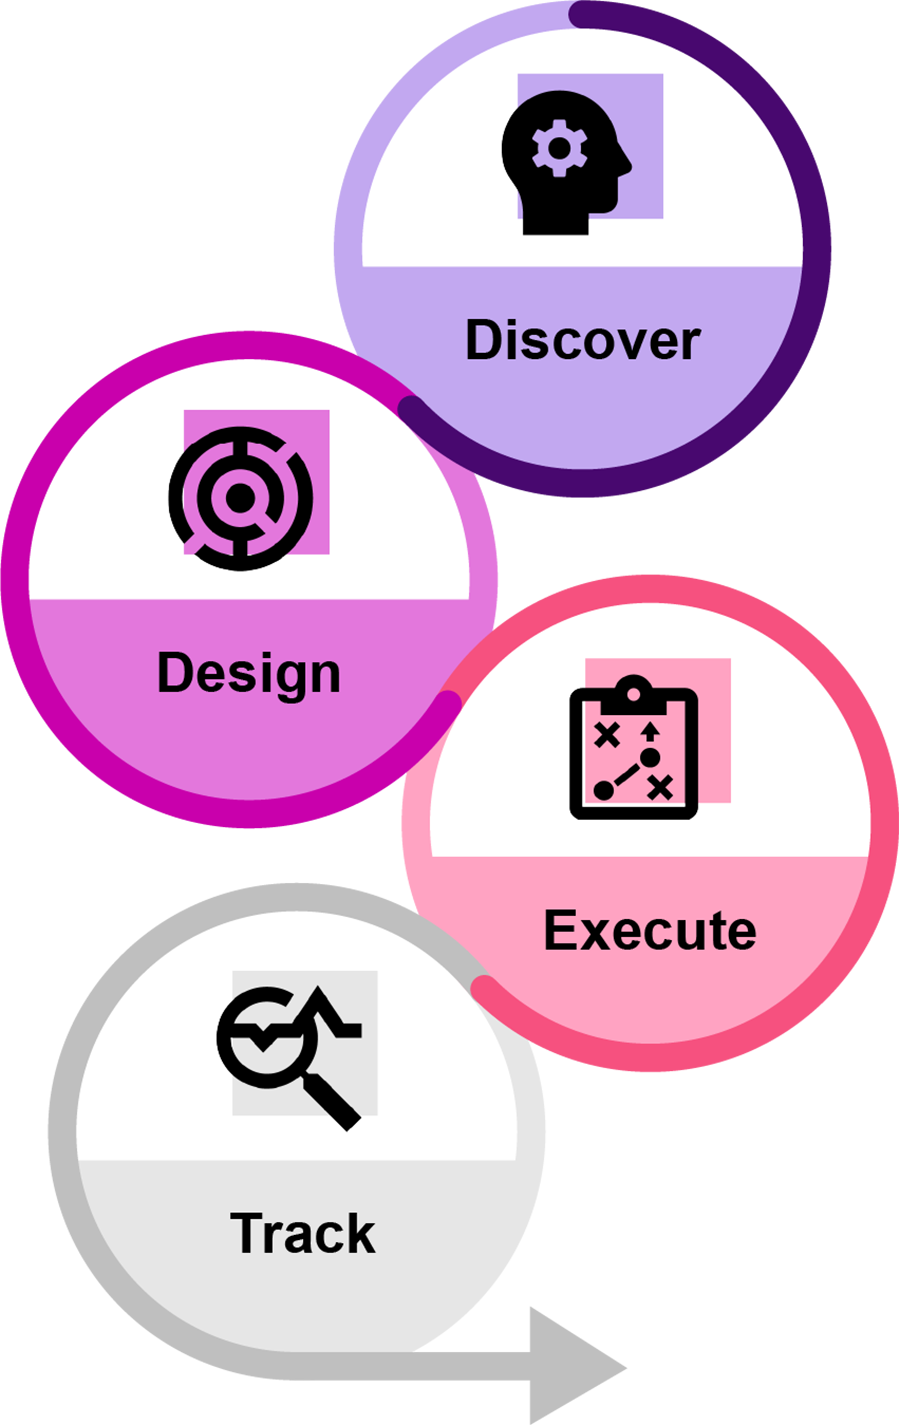 Our strategy is to work with clients to discover, design, execute and track your needs as an organization.